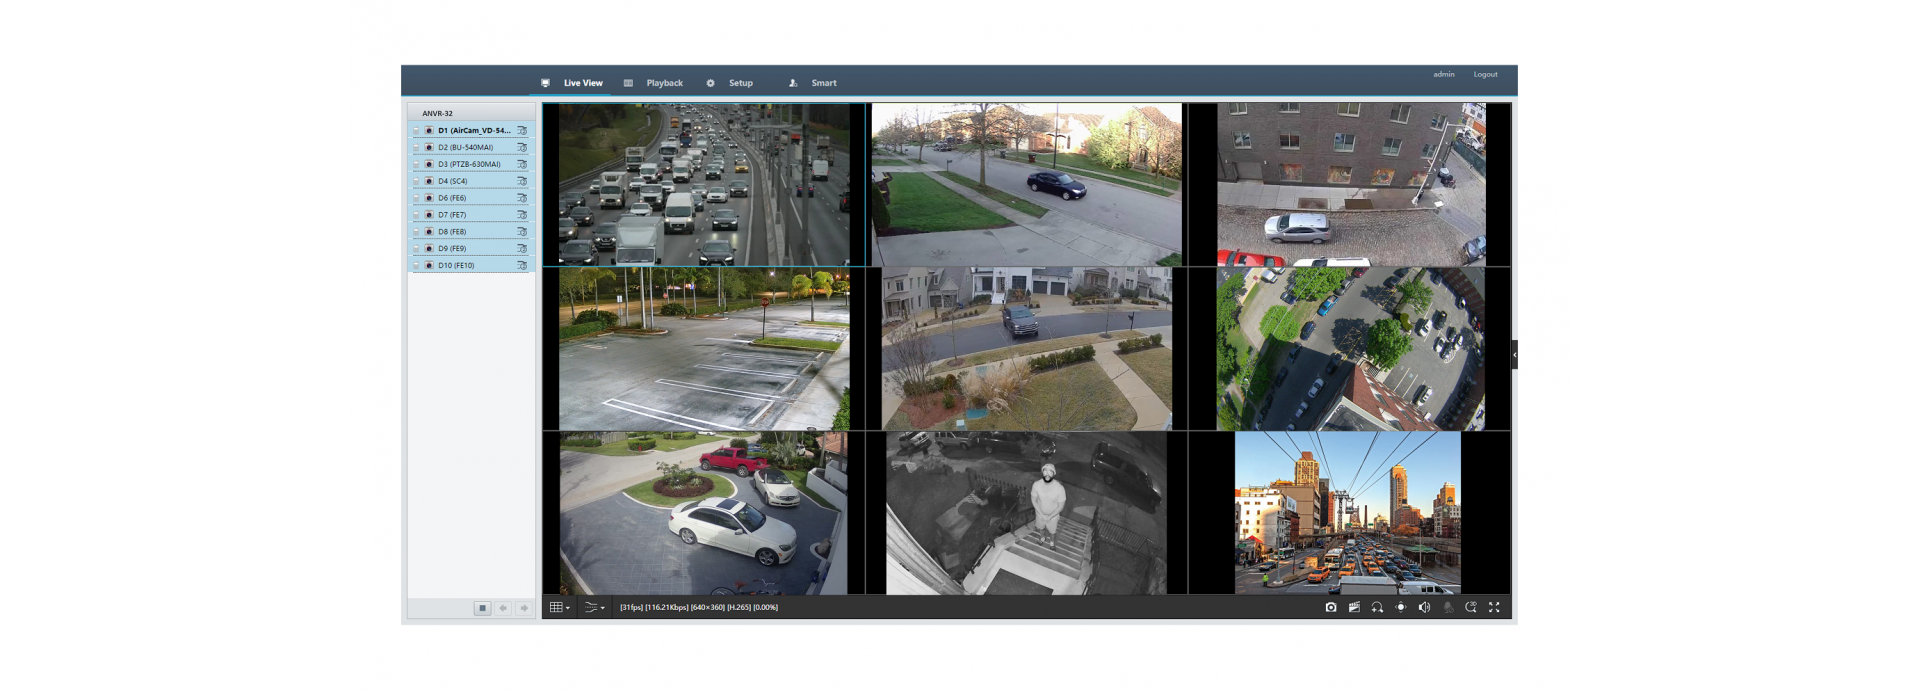 32 Channels IP camera Performing Real-time Remote Monitoring